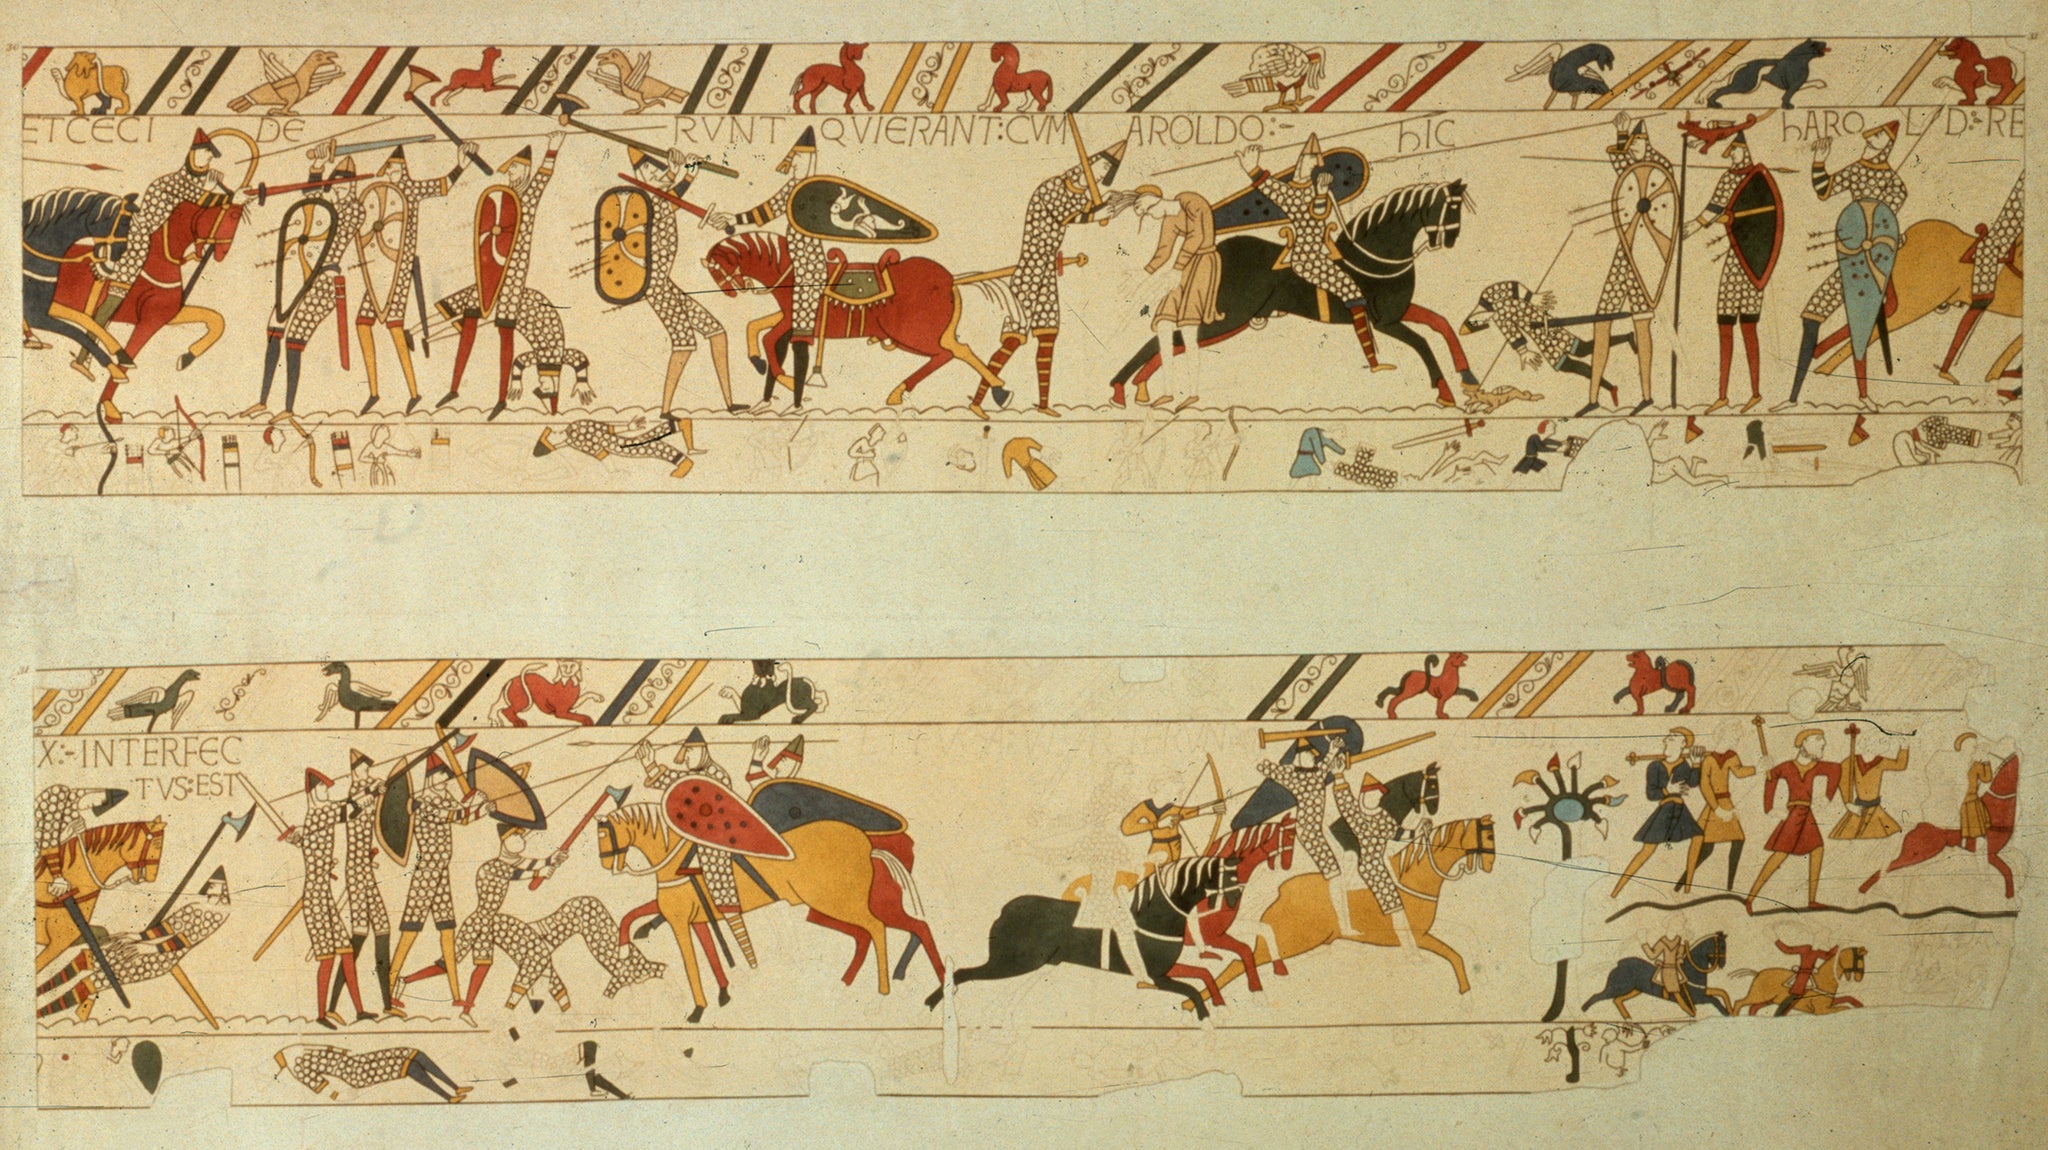 A section of the Bayeaux Tapestry showing the death of Harold II